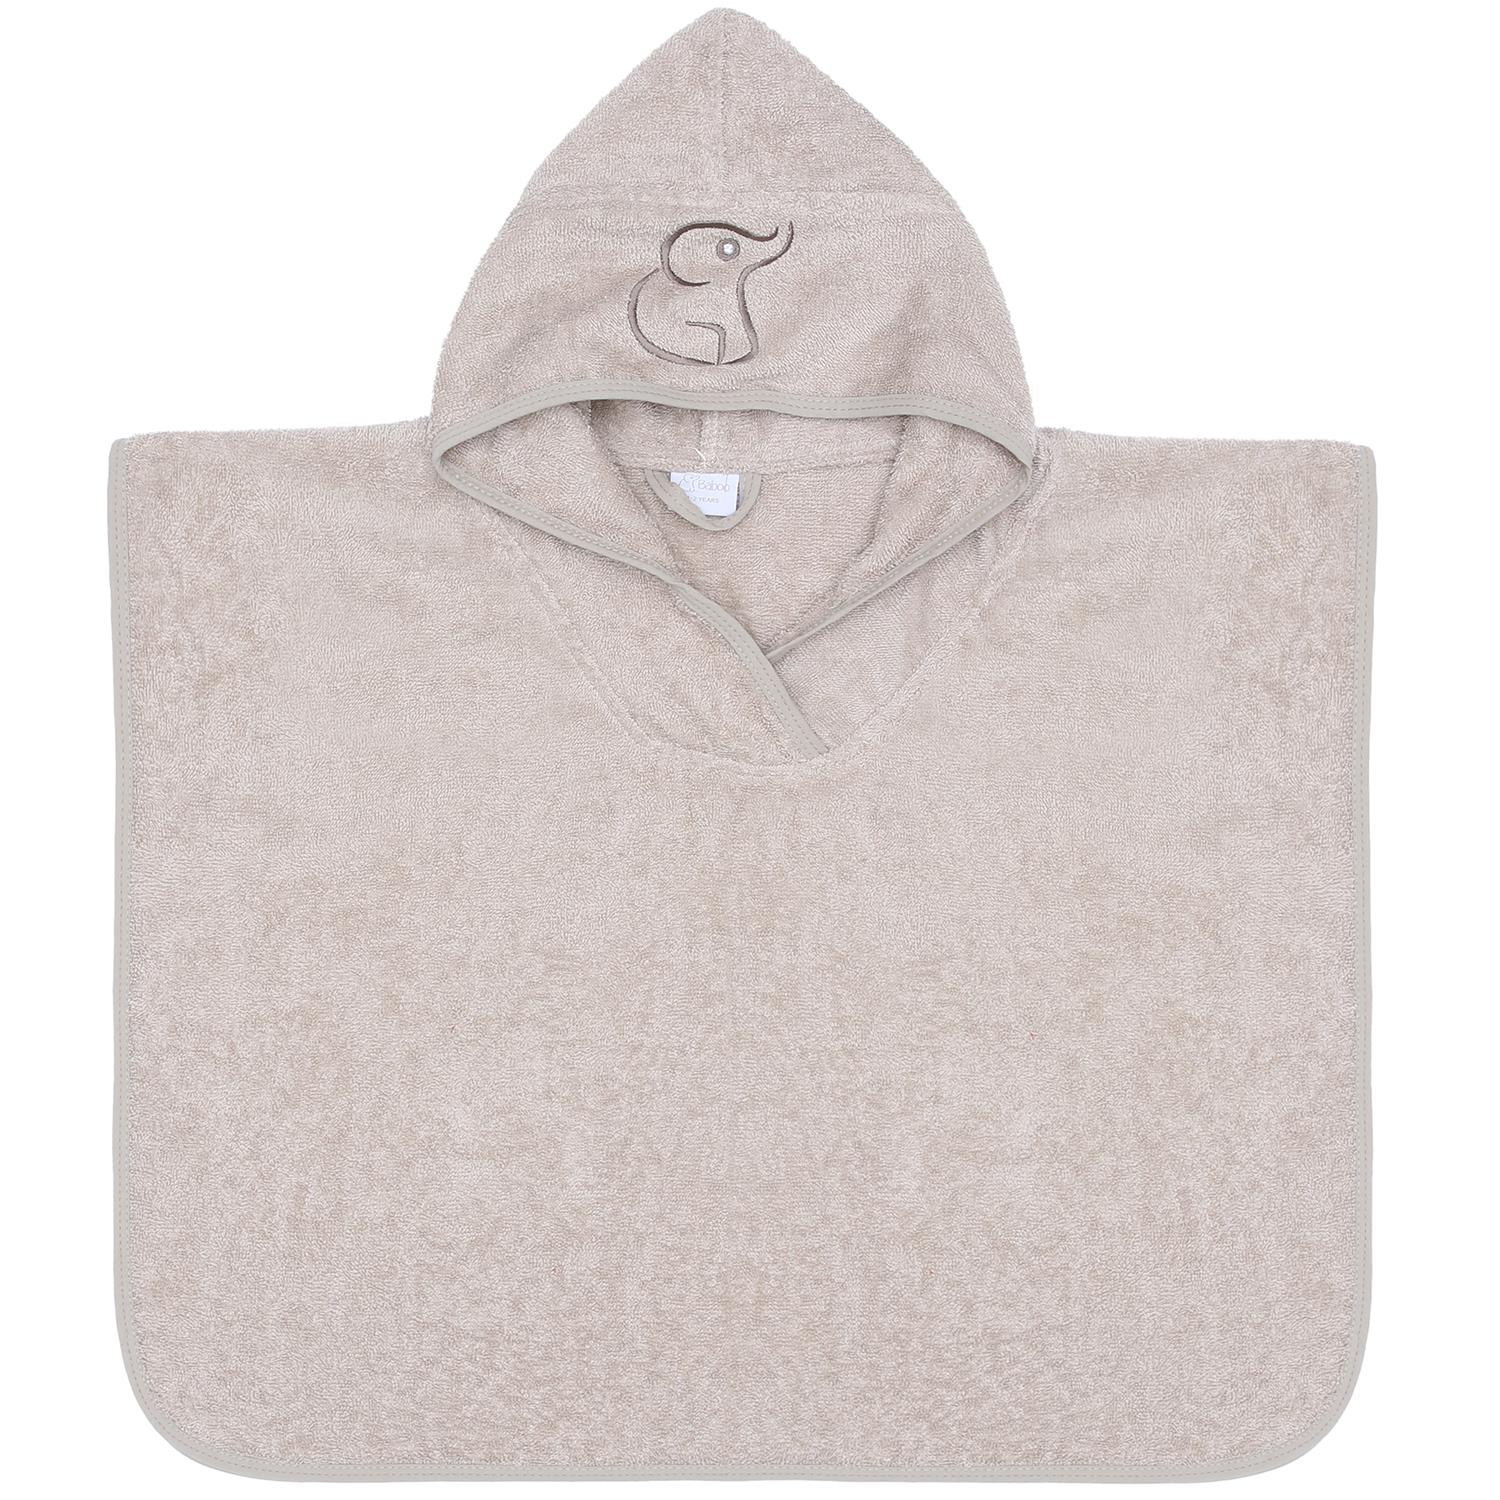 Poncho Organic Cotton Baby and Kids Towel Beige